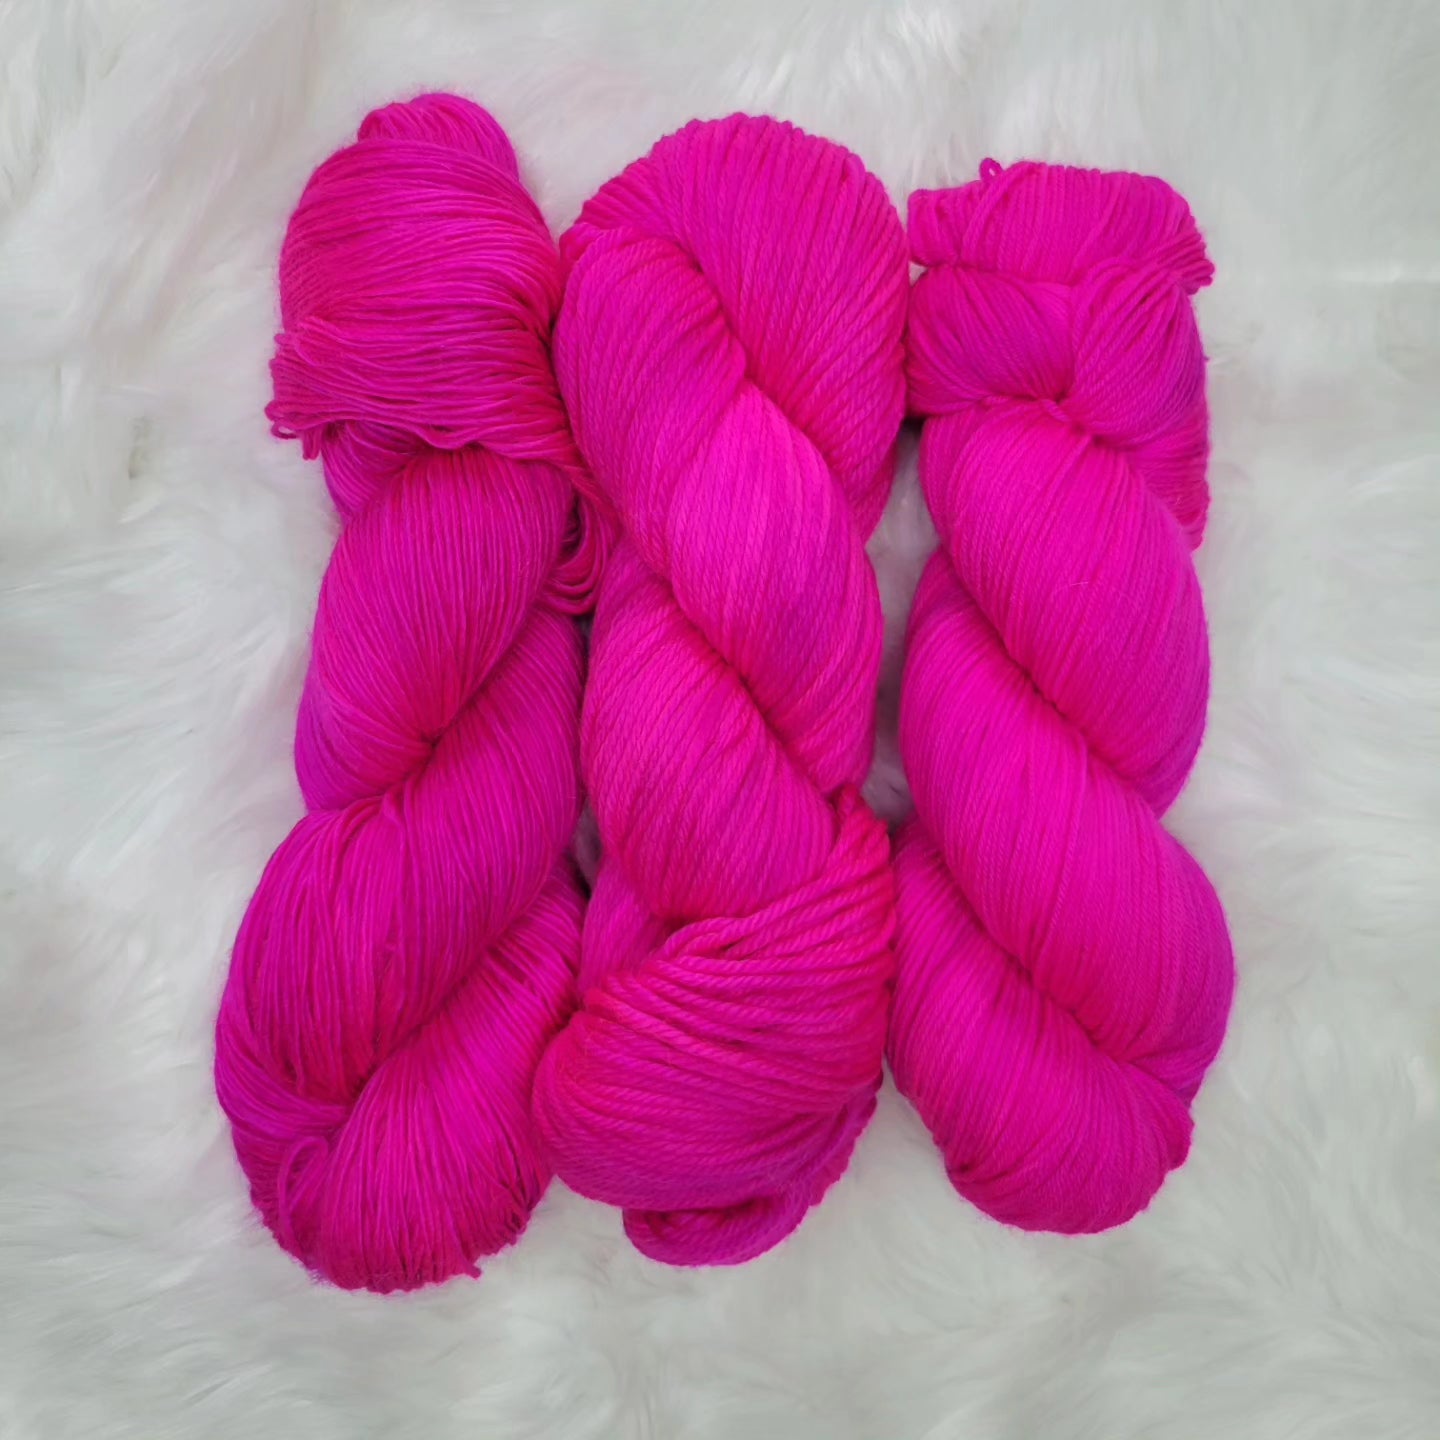 PRE-ORDER Hand Dyed Yarn - Summer Neons Collection